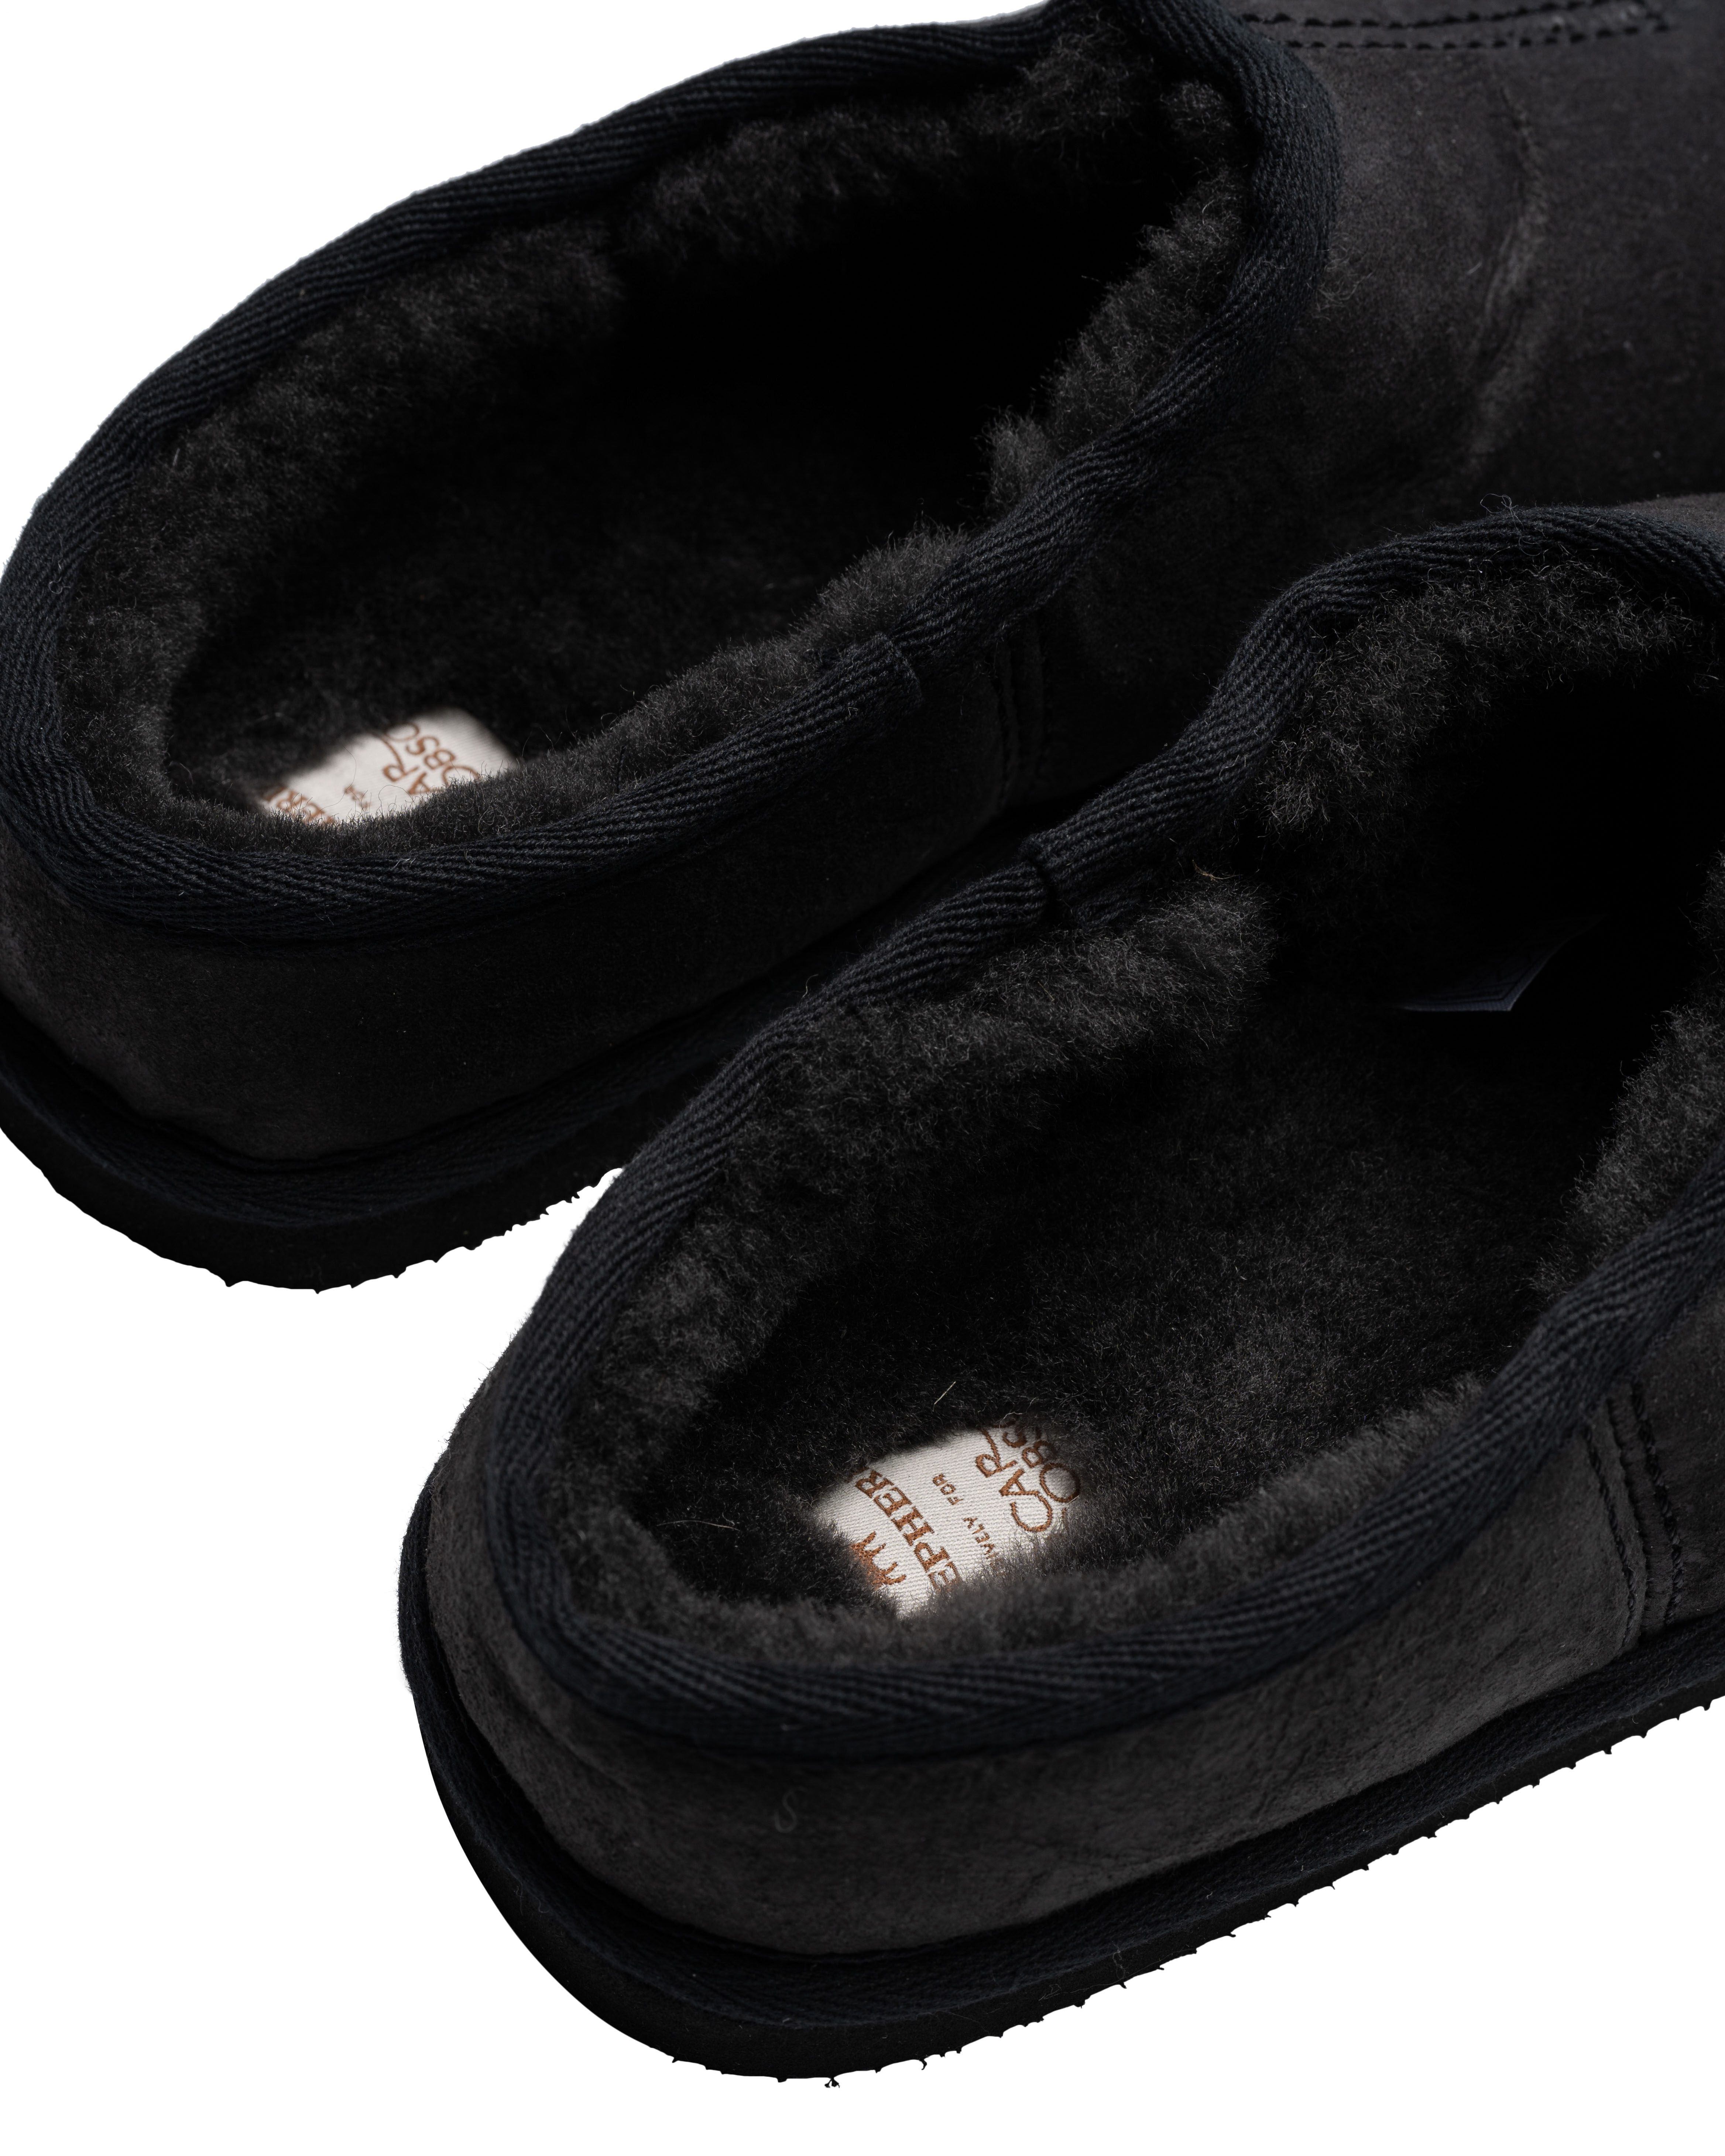 Frithiof slippers